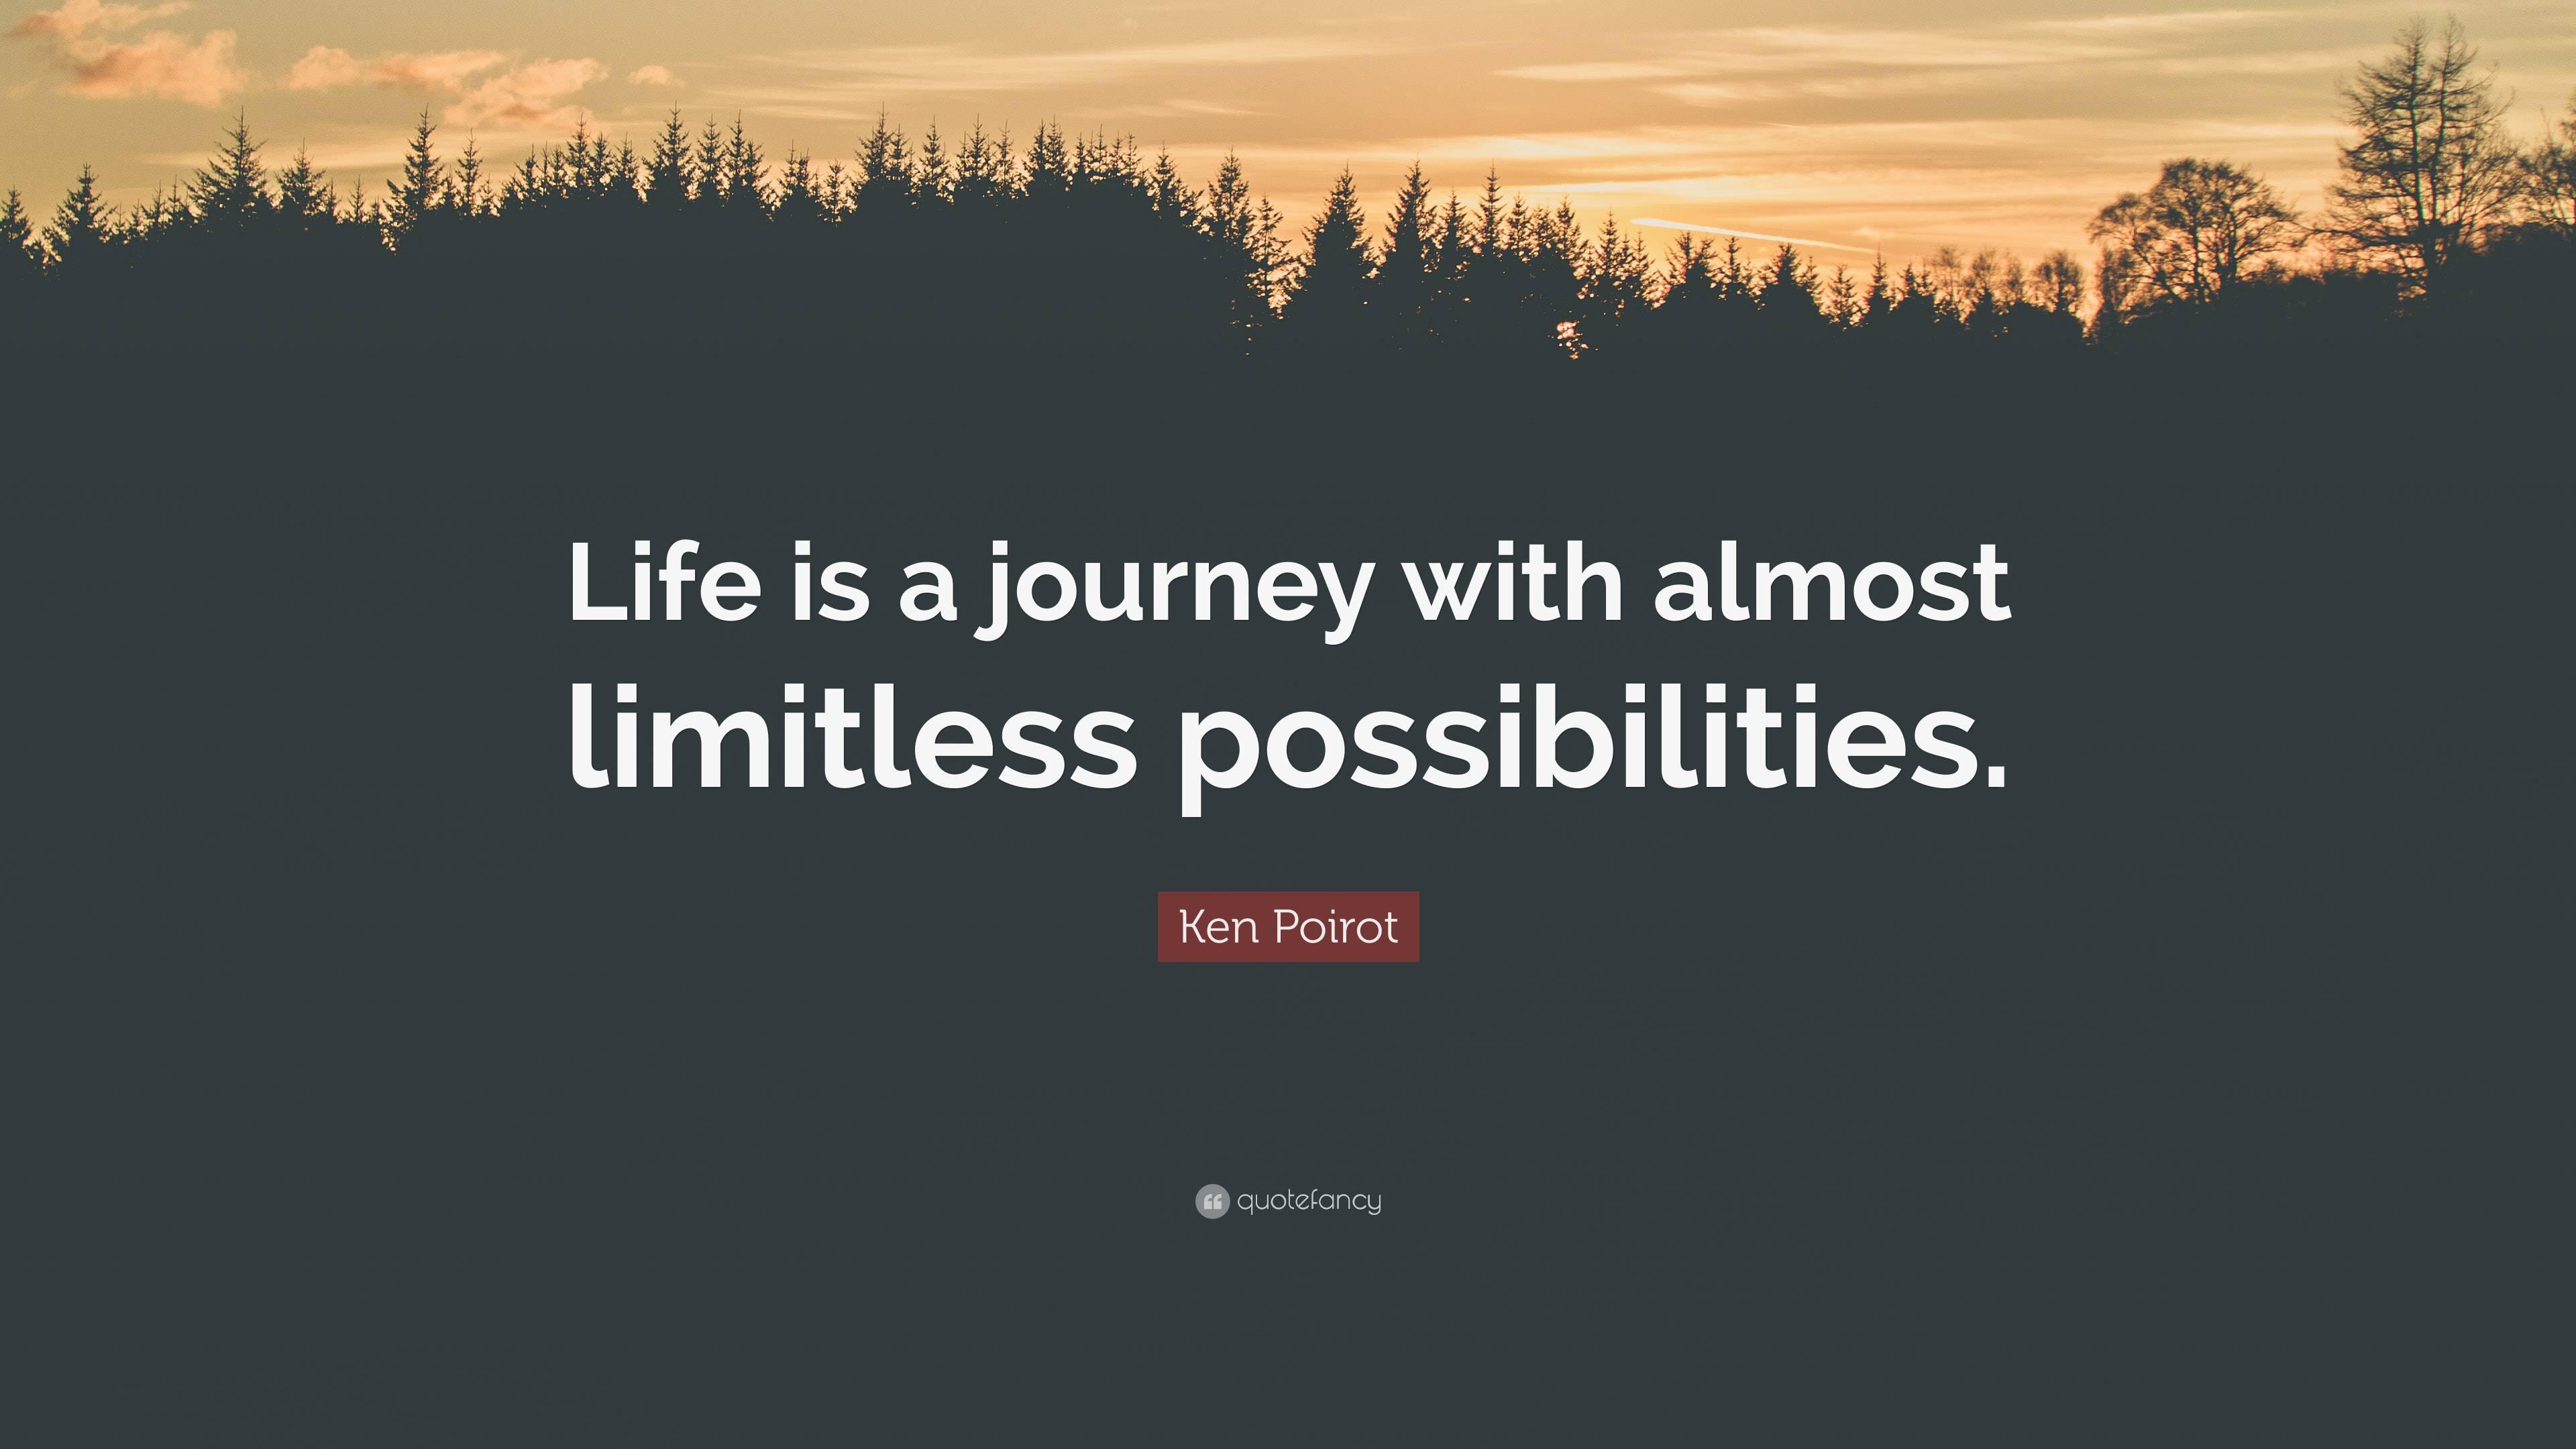 Ken Poirot Quote: “Life is a journey with almost limitless possibilities.”